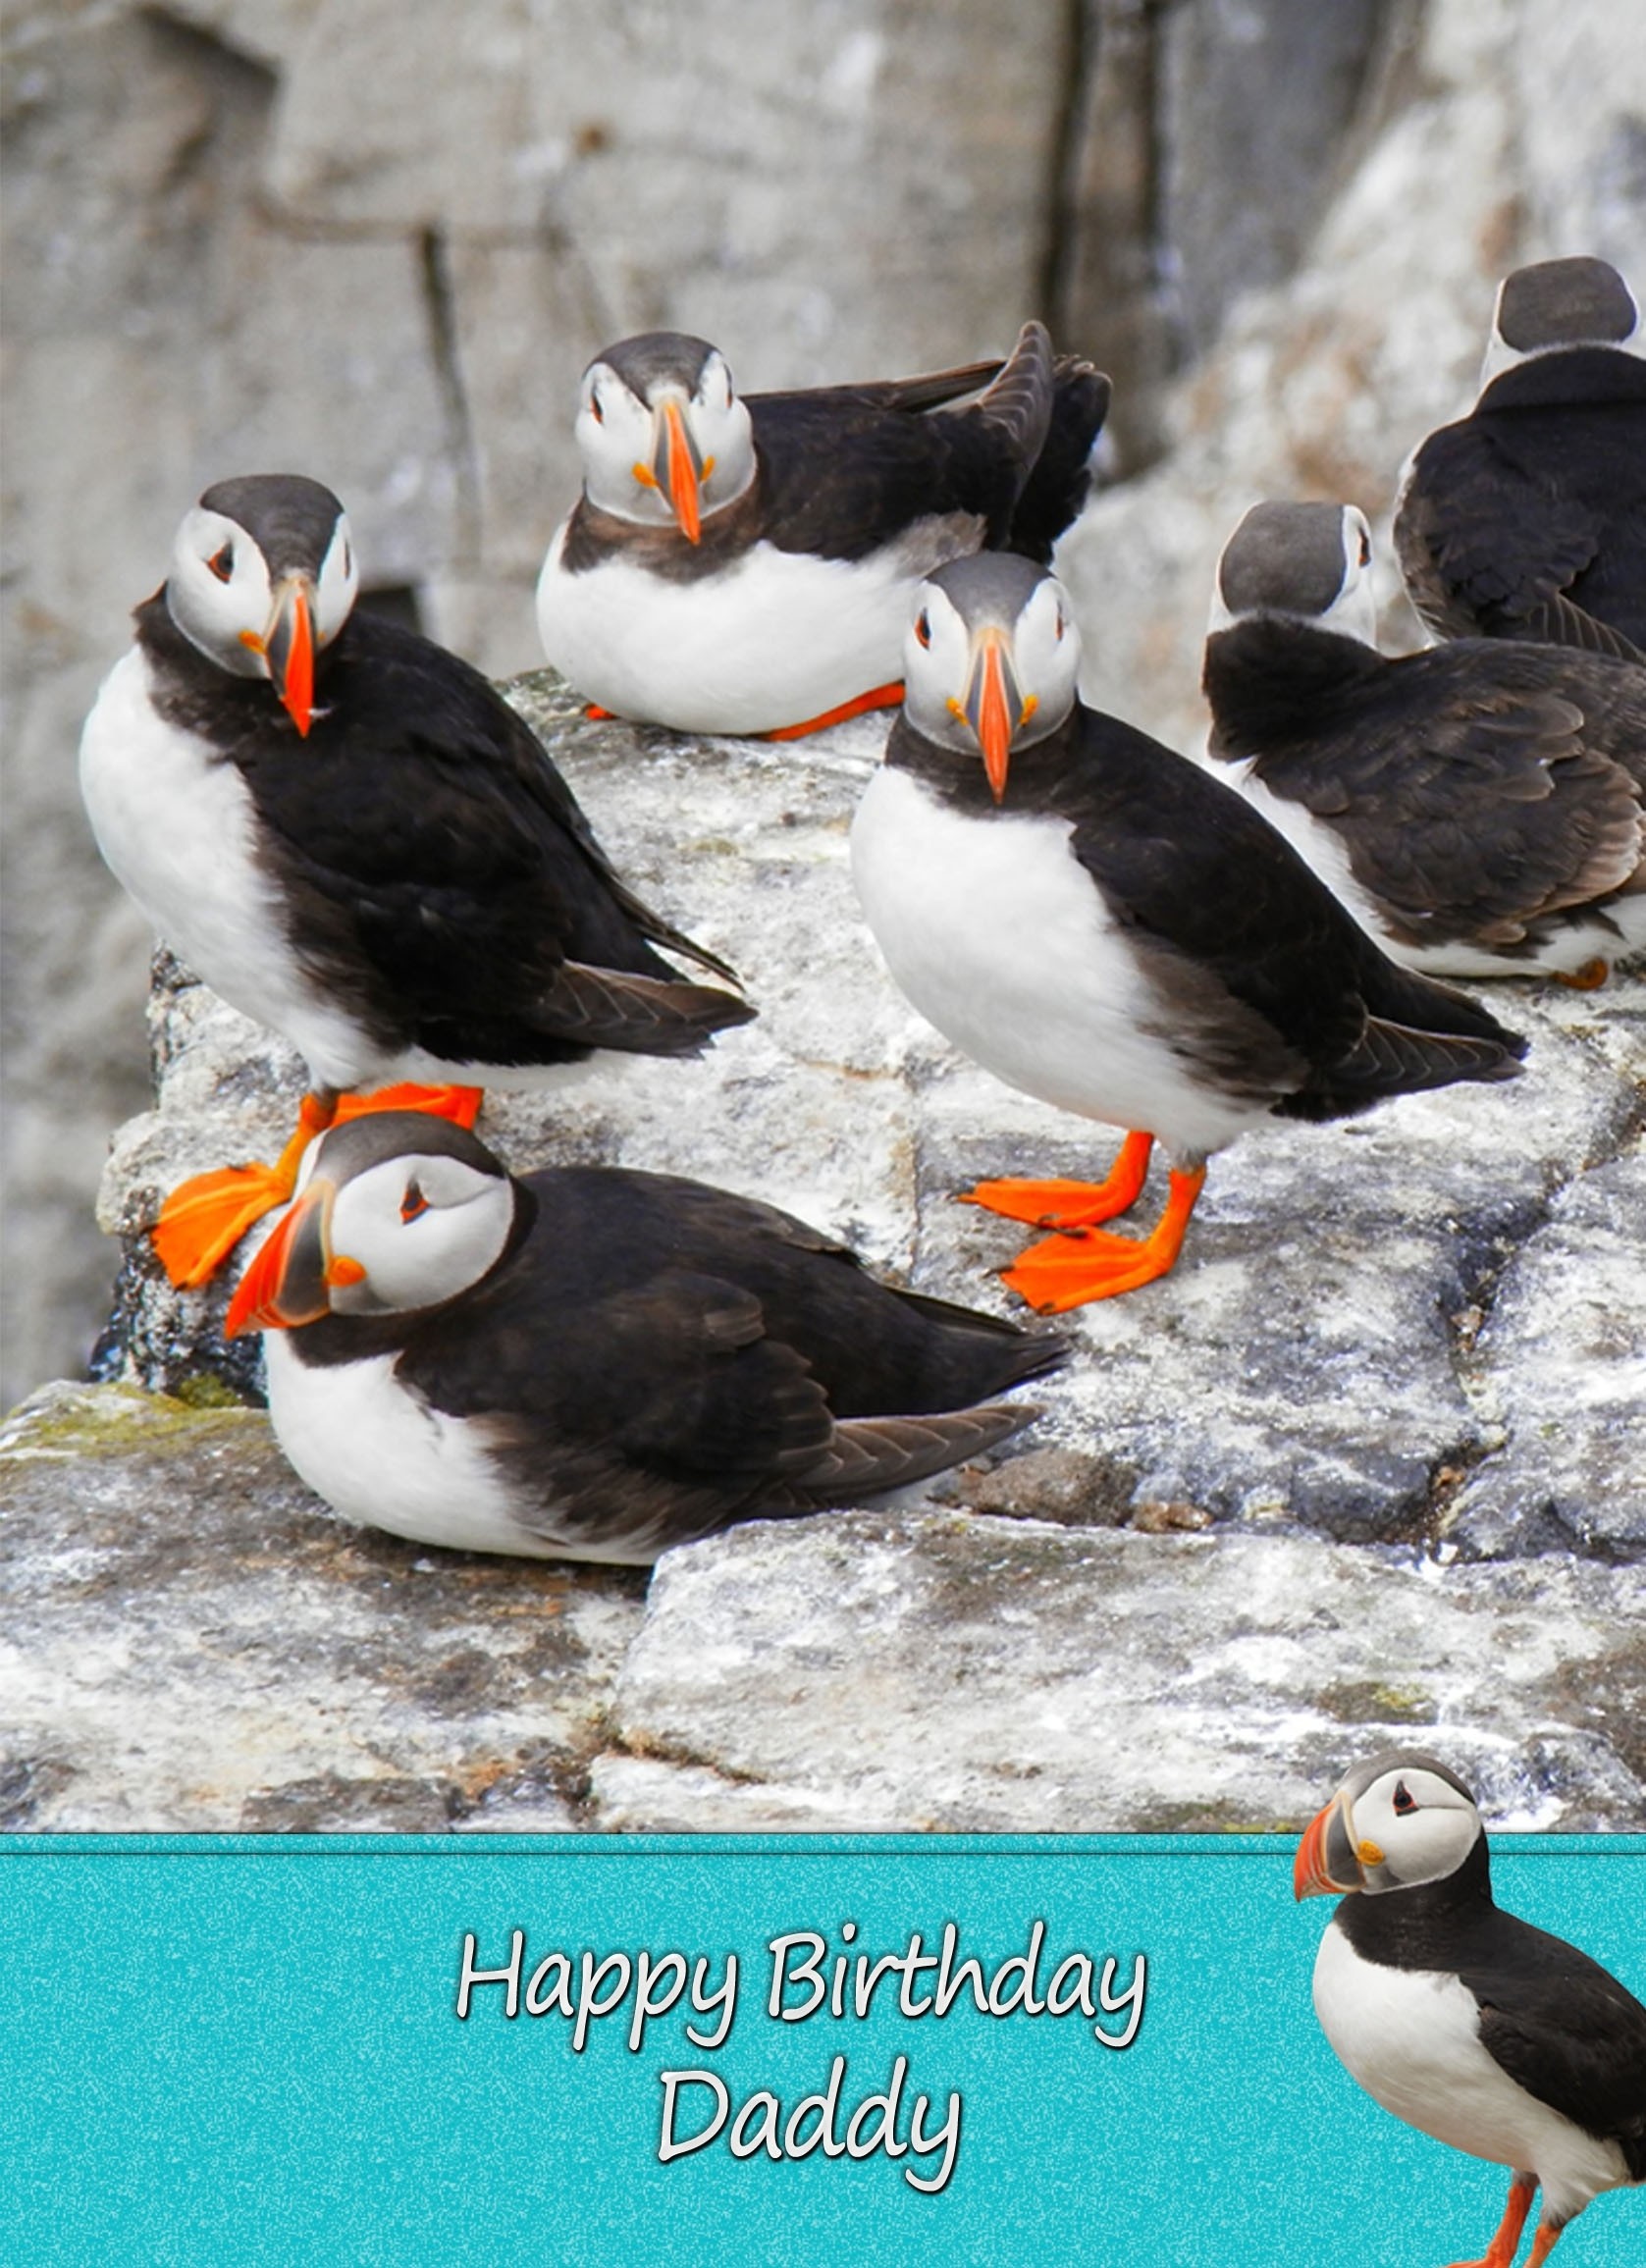 Personalised Puffin Card